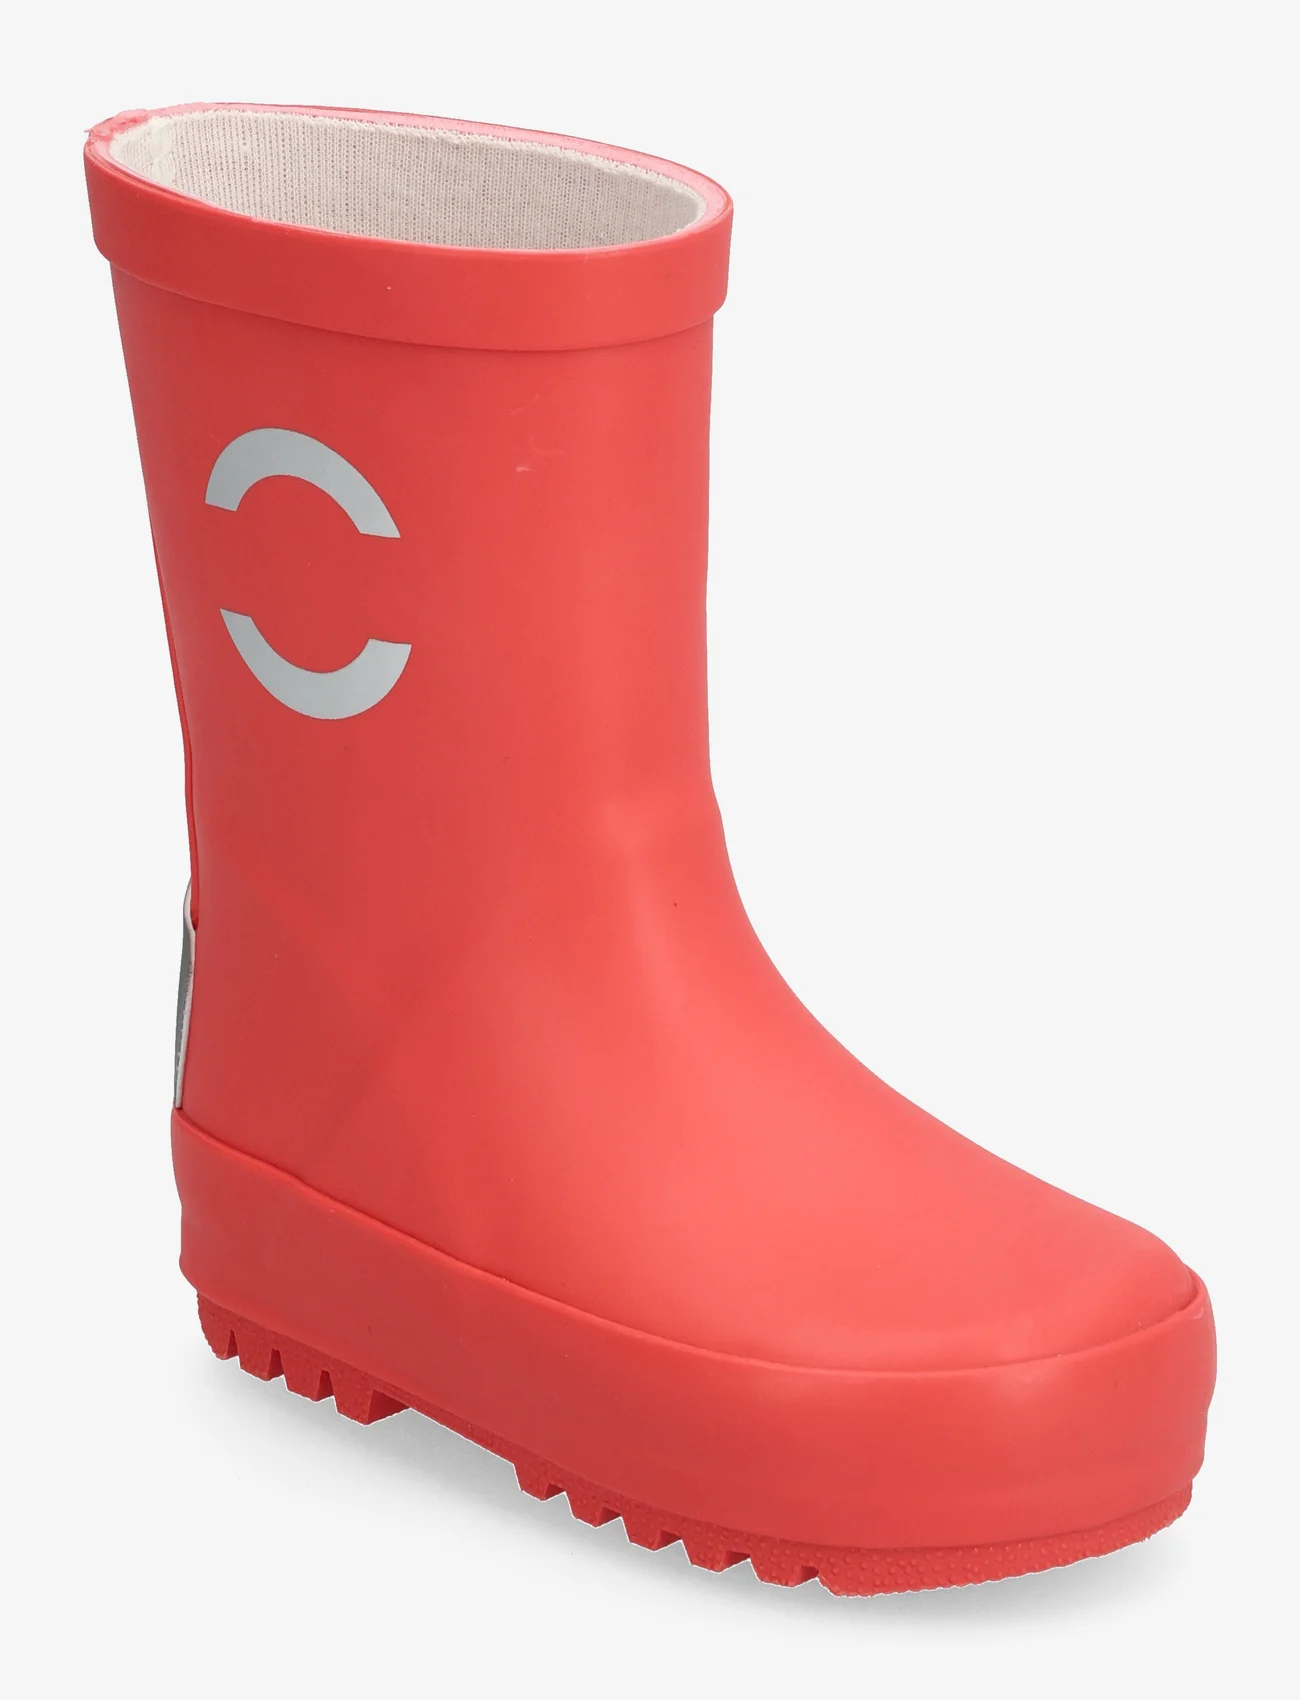 mikk-line - Wellies - Solid - unlined rubberboots - cayenne - 0